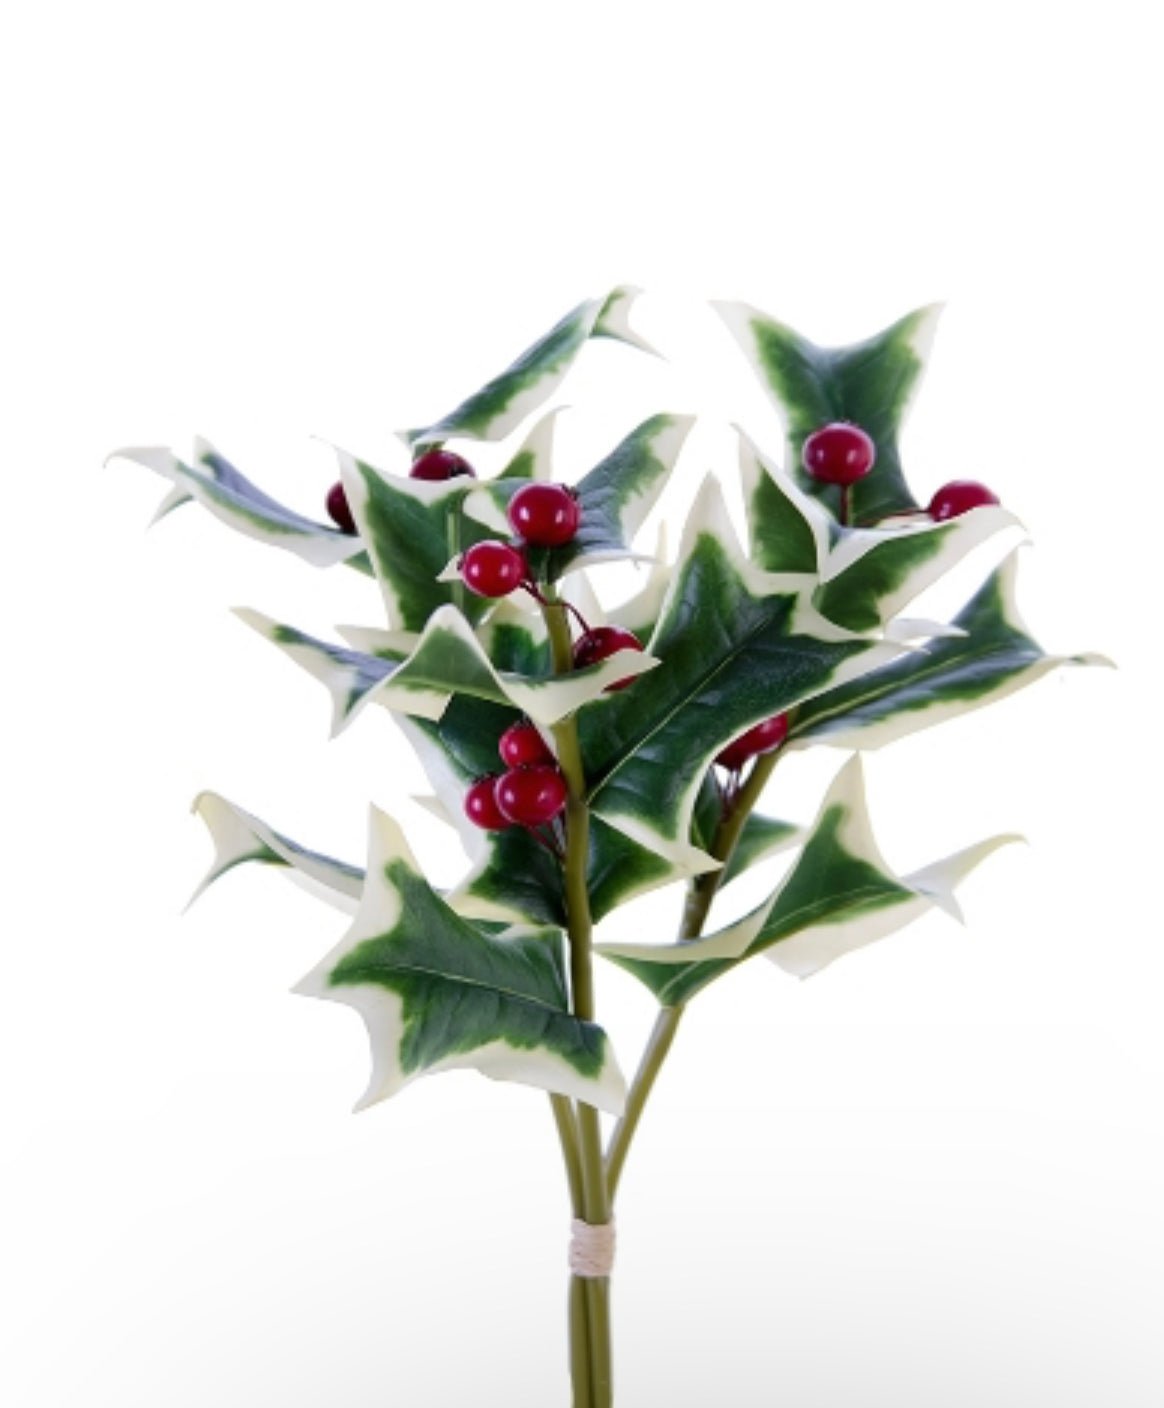 Artificial holly and red berries bundle - Greenery Marketgreenery2825148GW